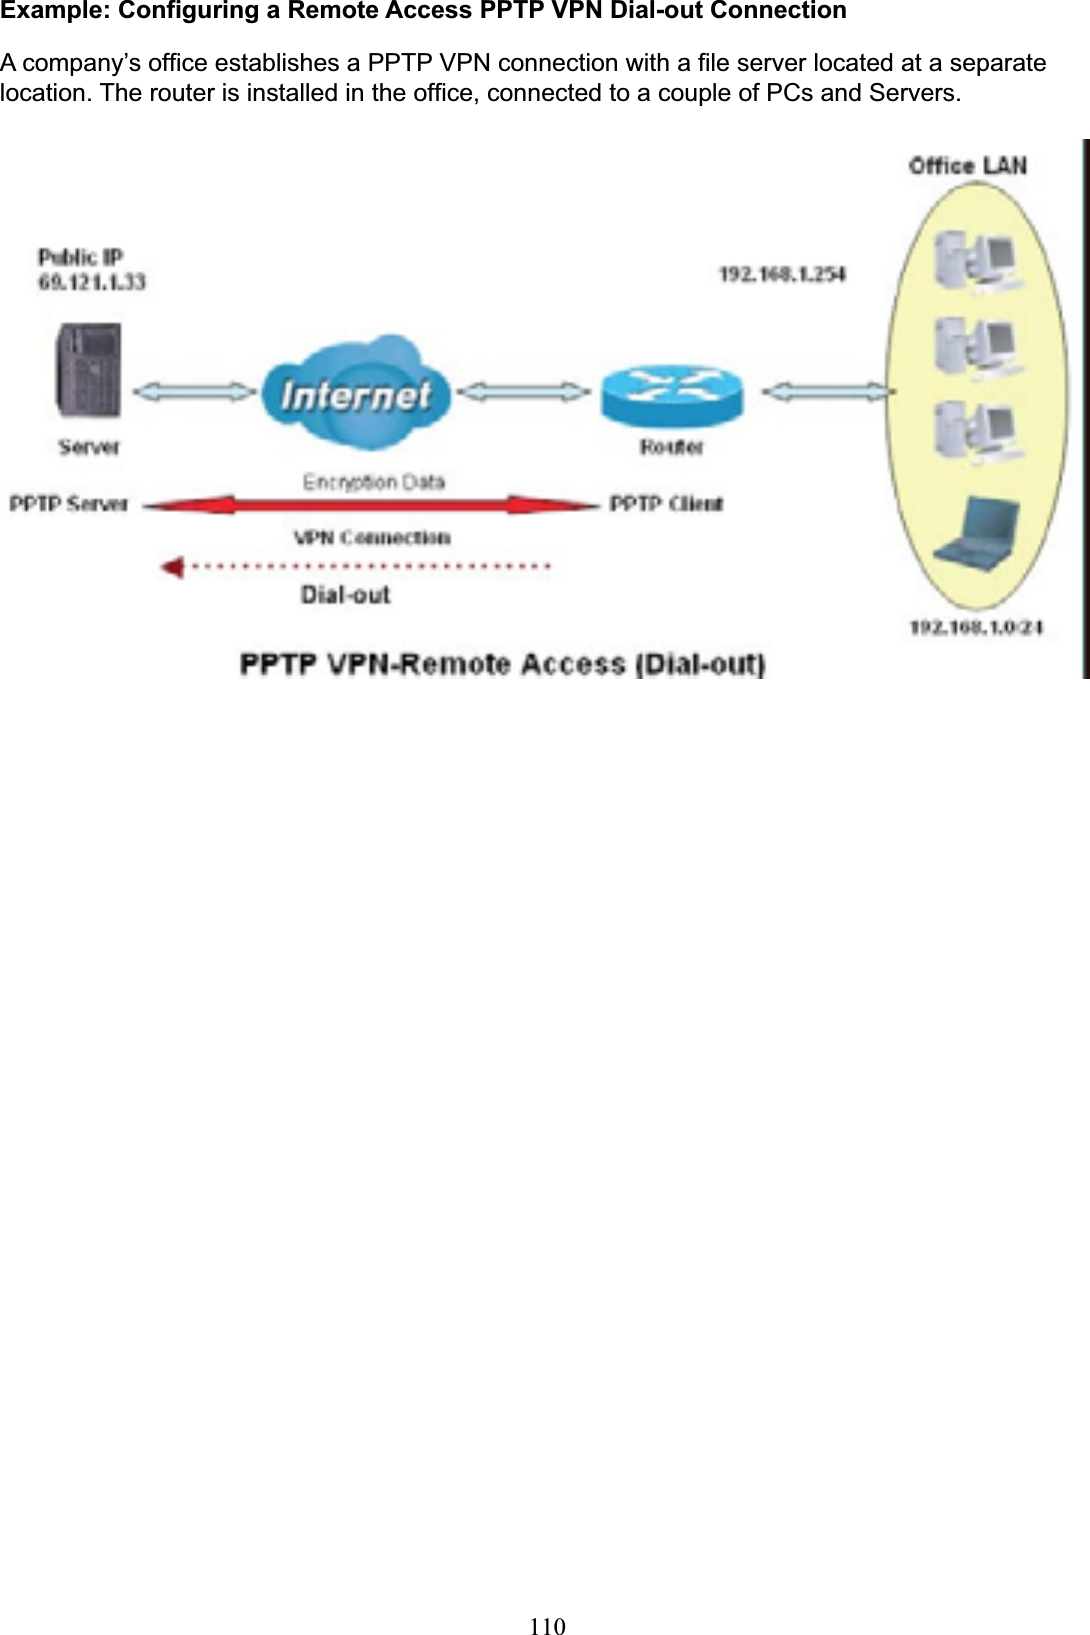 110Example: Configuring a Remote Access PPTP VPN Dial-out ConnectionA company’s office establishes a PPTP VPN connection with a file server located at a separate location. The router is installed in the office, connected to a couple of PCs and Servers. 